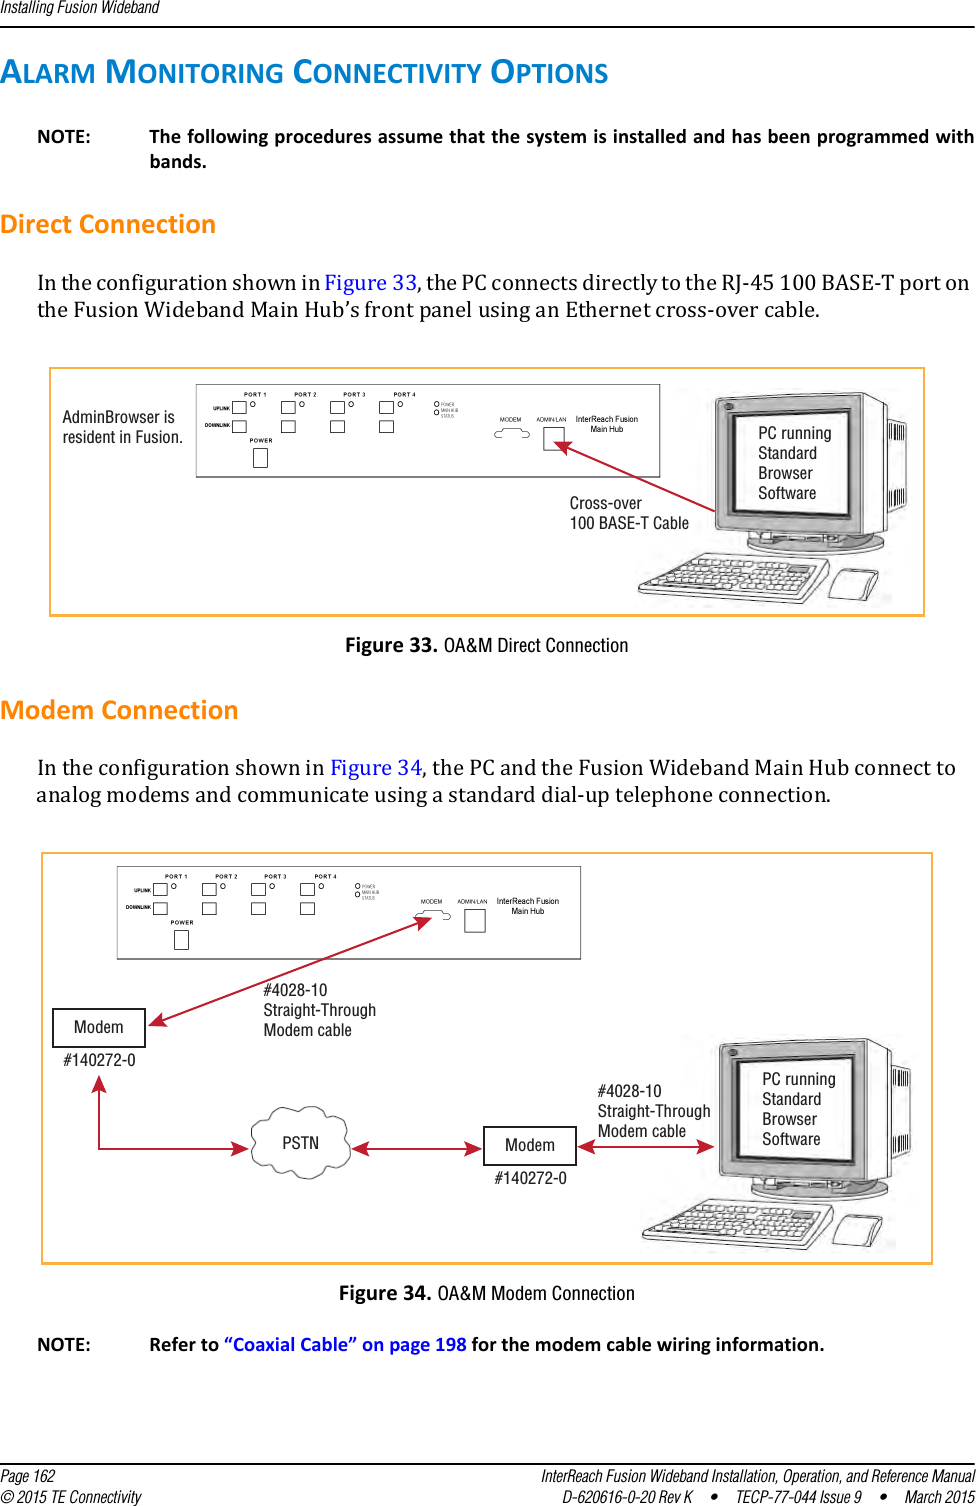 Installing Fusion Wideband  Page 162 InterReach Fusion Wideband Installation, Operation, and Reference Manual© 2015 TE Connectivity D-620616-0-20 Rev K  •  TECP-77-044 Issue 9  •  March 2015ALARM MONITORING CONNECTIVITY OPTIONSNOTE: The following procedures assume that the system is installed and has been programmed with bands. Direct ConnectionIn the configuration shown in Figure 33, the PC connects directly to the RJ-45 100 BASE-T port on the Fusion Wideband Main Hub’s front panel using an Ethernet cross-over cable.Figure 33. OA&amp;M Direct ConnectionModem ConnectionIn the configuration shown in Figure 34, the PC and the Fusion Wideband Main Hub connect to analog modems and communicate using a standard dial-up telephone connection.Figure 34. OA&amp;M Modem Connection NOTE: Refer to “Coaxial Cable” on page 198 for the modem cable wiring information.PC runningStandardBrowserSoftwareCross-over100 BASE-T CableAdminBrowser isresident in Fusion.PSTNPC runningStandardBrowserSoftwareModem#140272-0Modem#140272-0#4028-10Straight-ThroughModem cable#4028-10Straight-ThroughModem cable